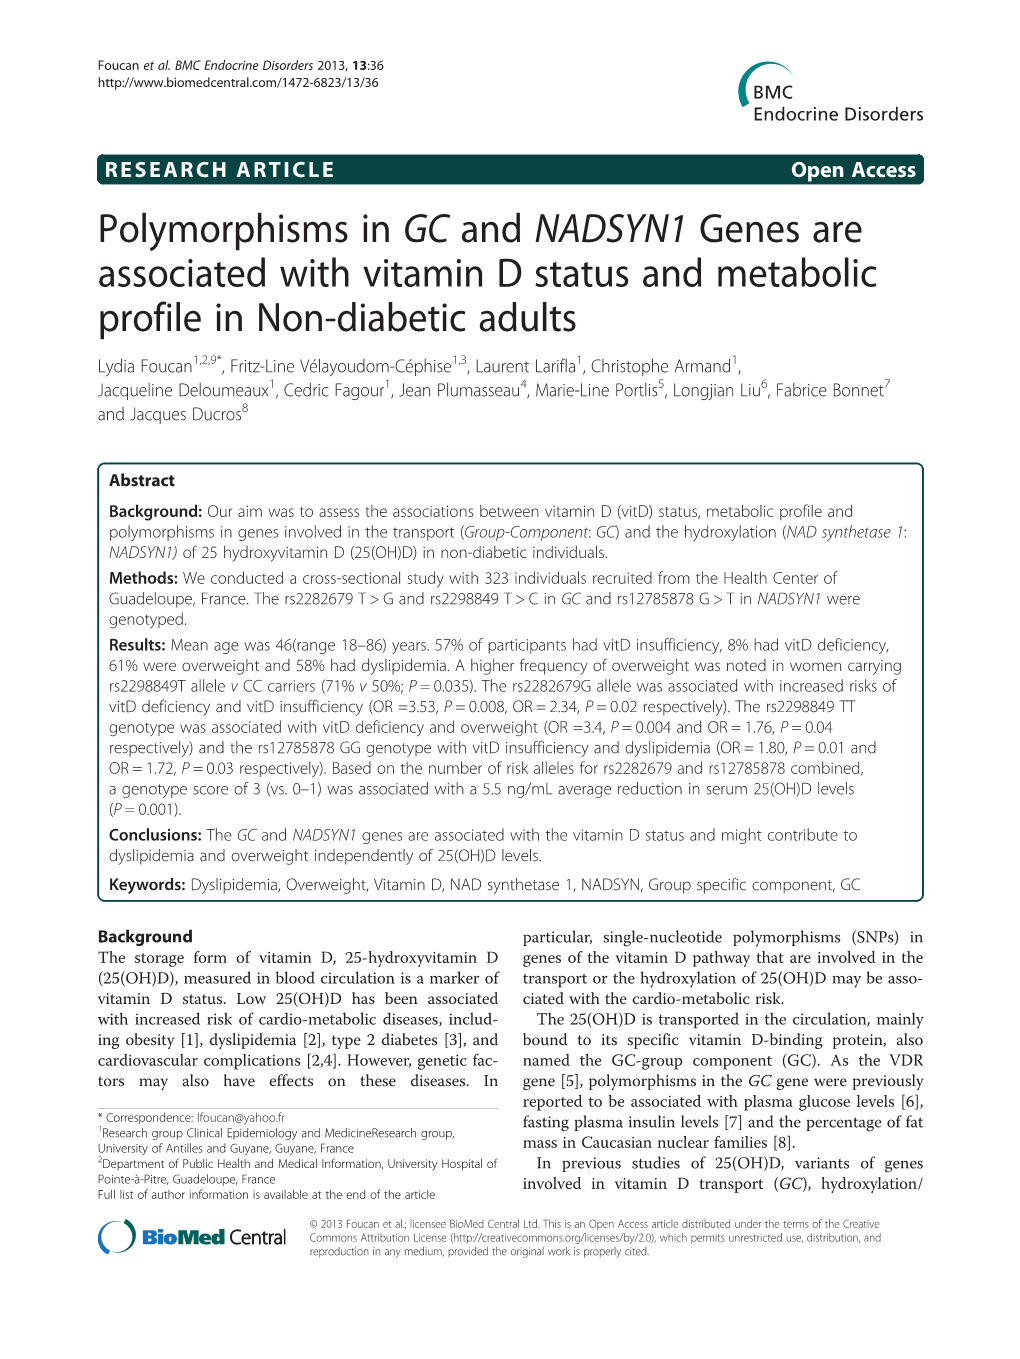 Polymorphisms in GC and NADSYN1 Genes Are Associated with Vitamin